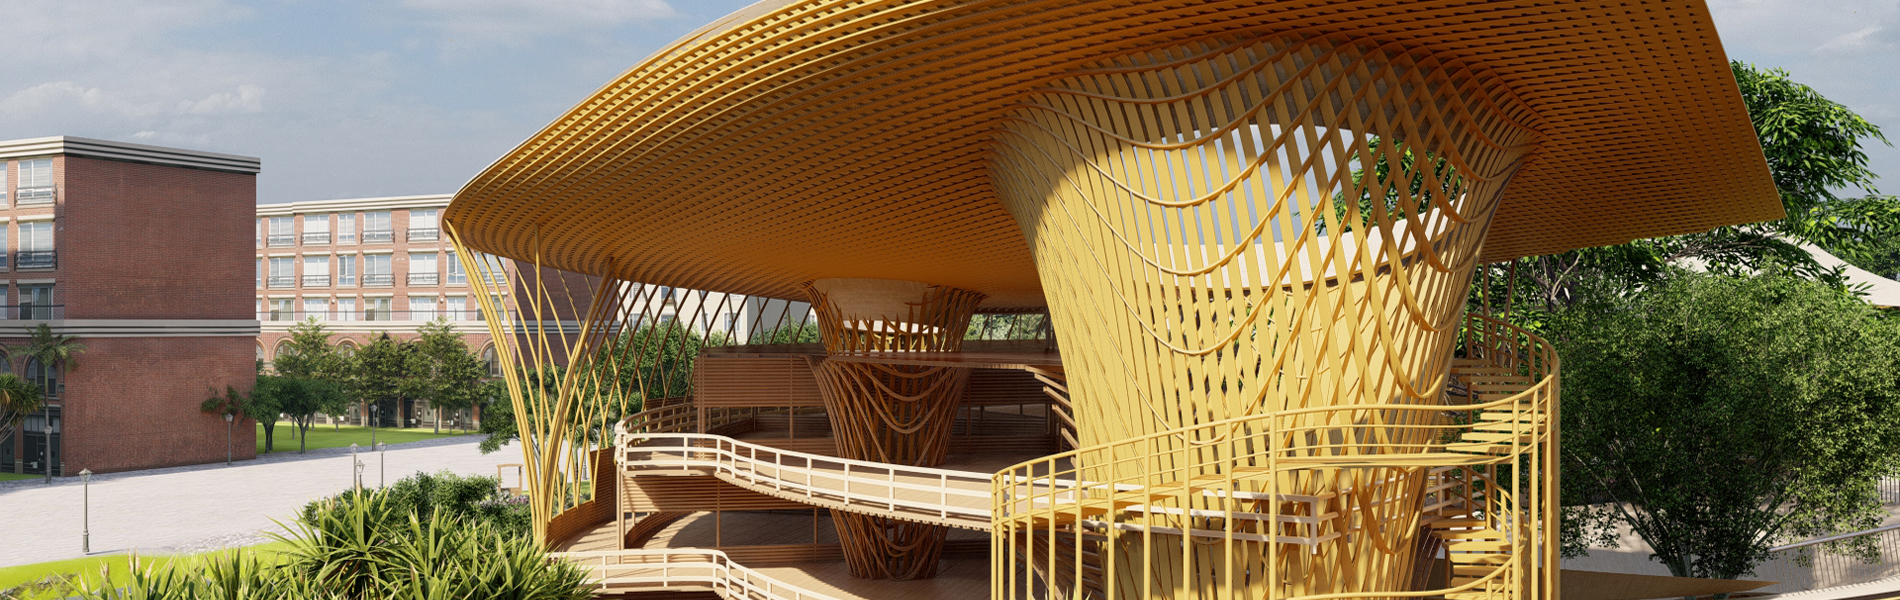 A lattice-like skin marries inverted funnel and canopy structures